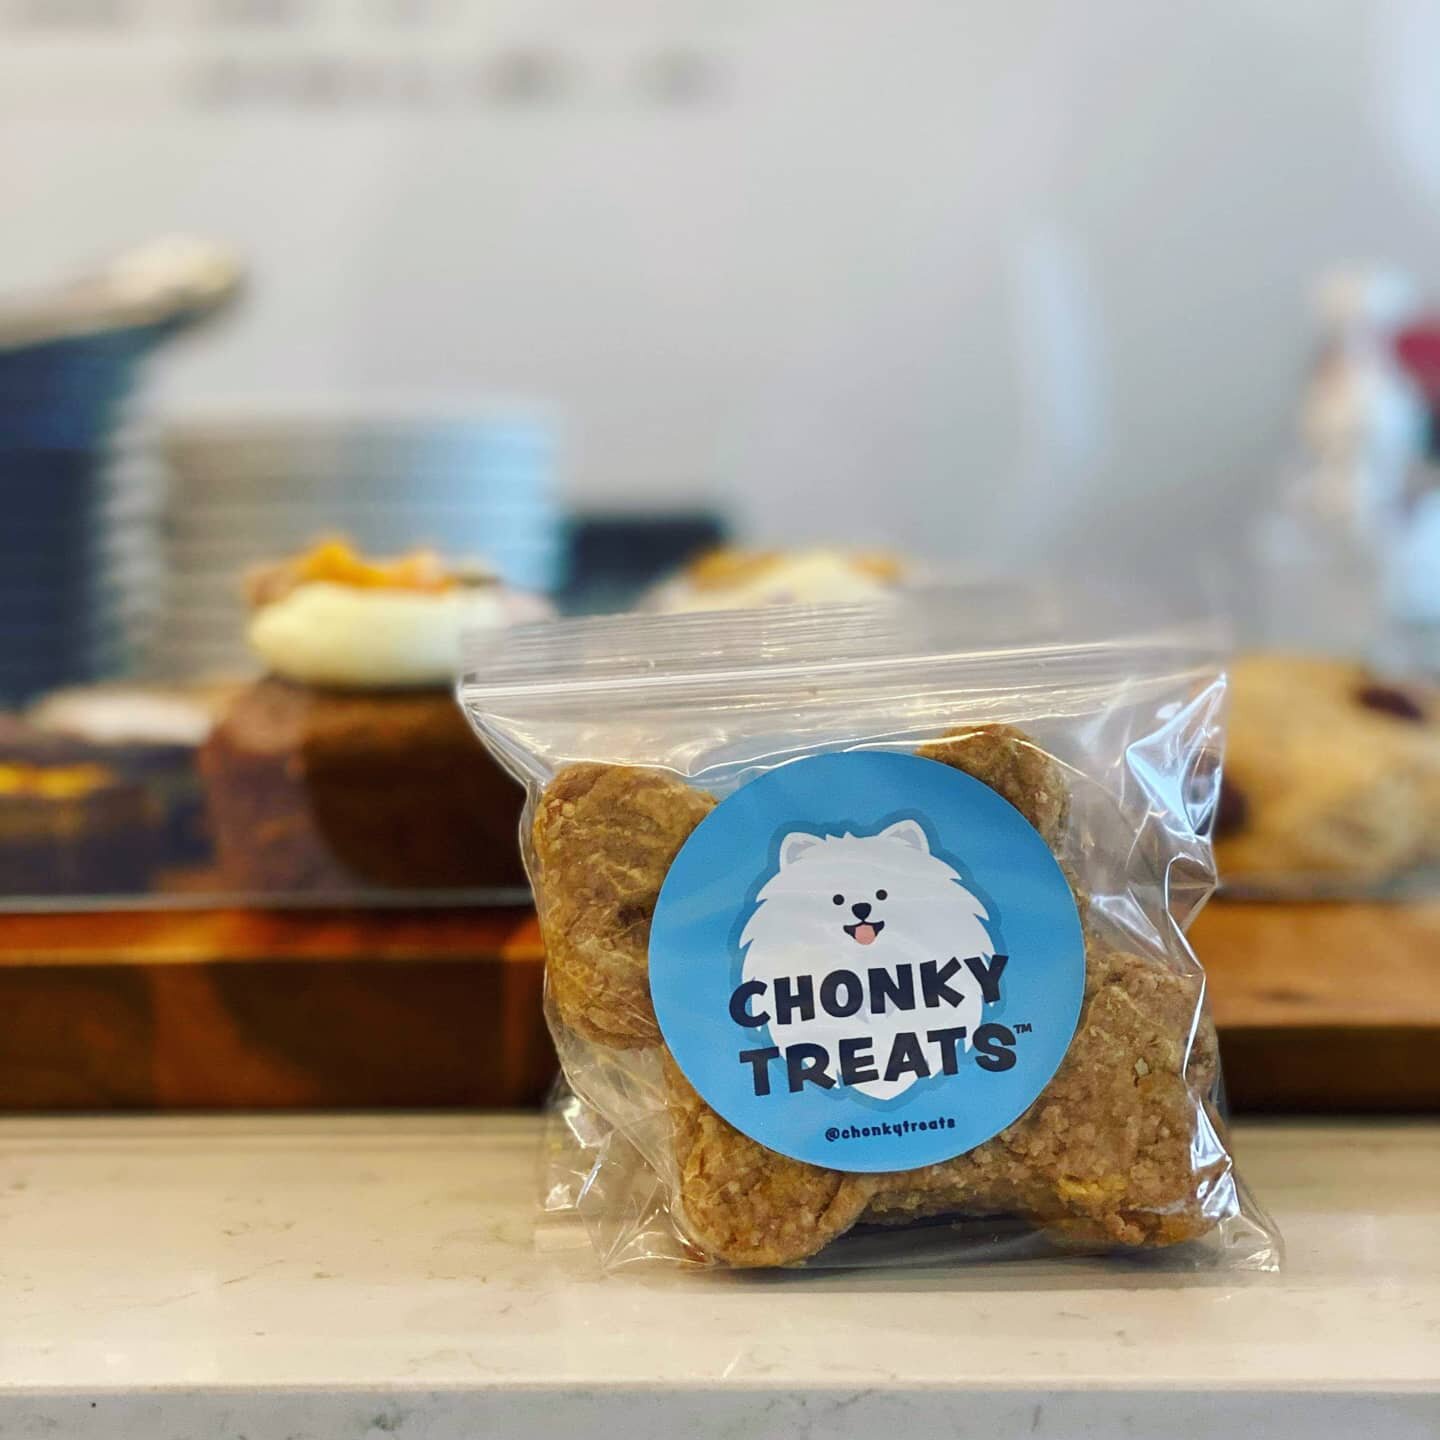 Congrats to @chonkytreats our dog treat supplier! She started her endeavor as a side project and from that a business has grown! 

Our dog patrons will be happy to know that these &quot;impawsibly delicious&quot; dog treats are made from human grade 